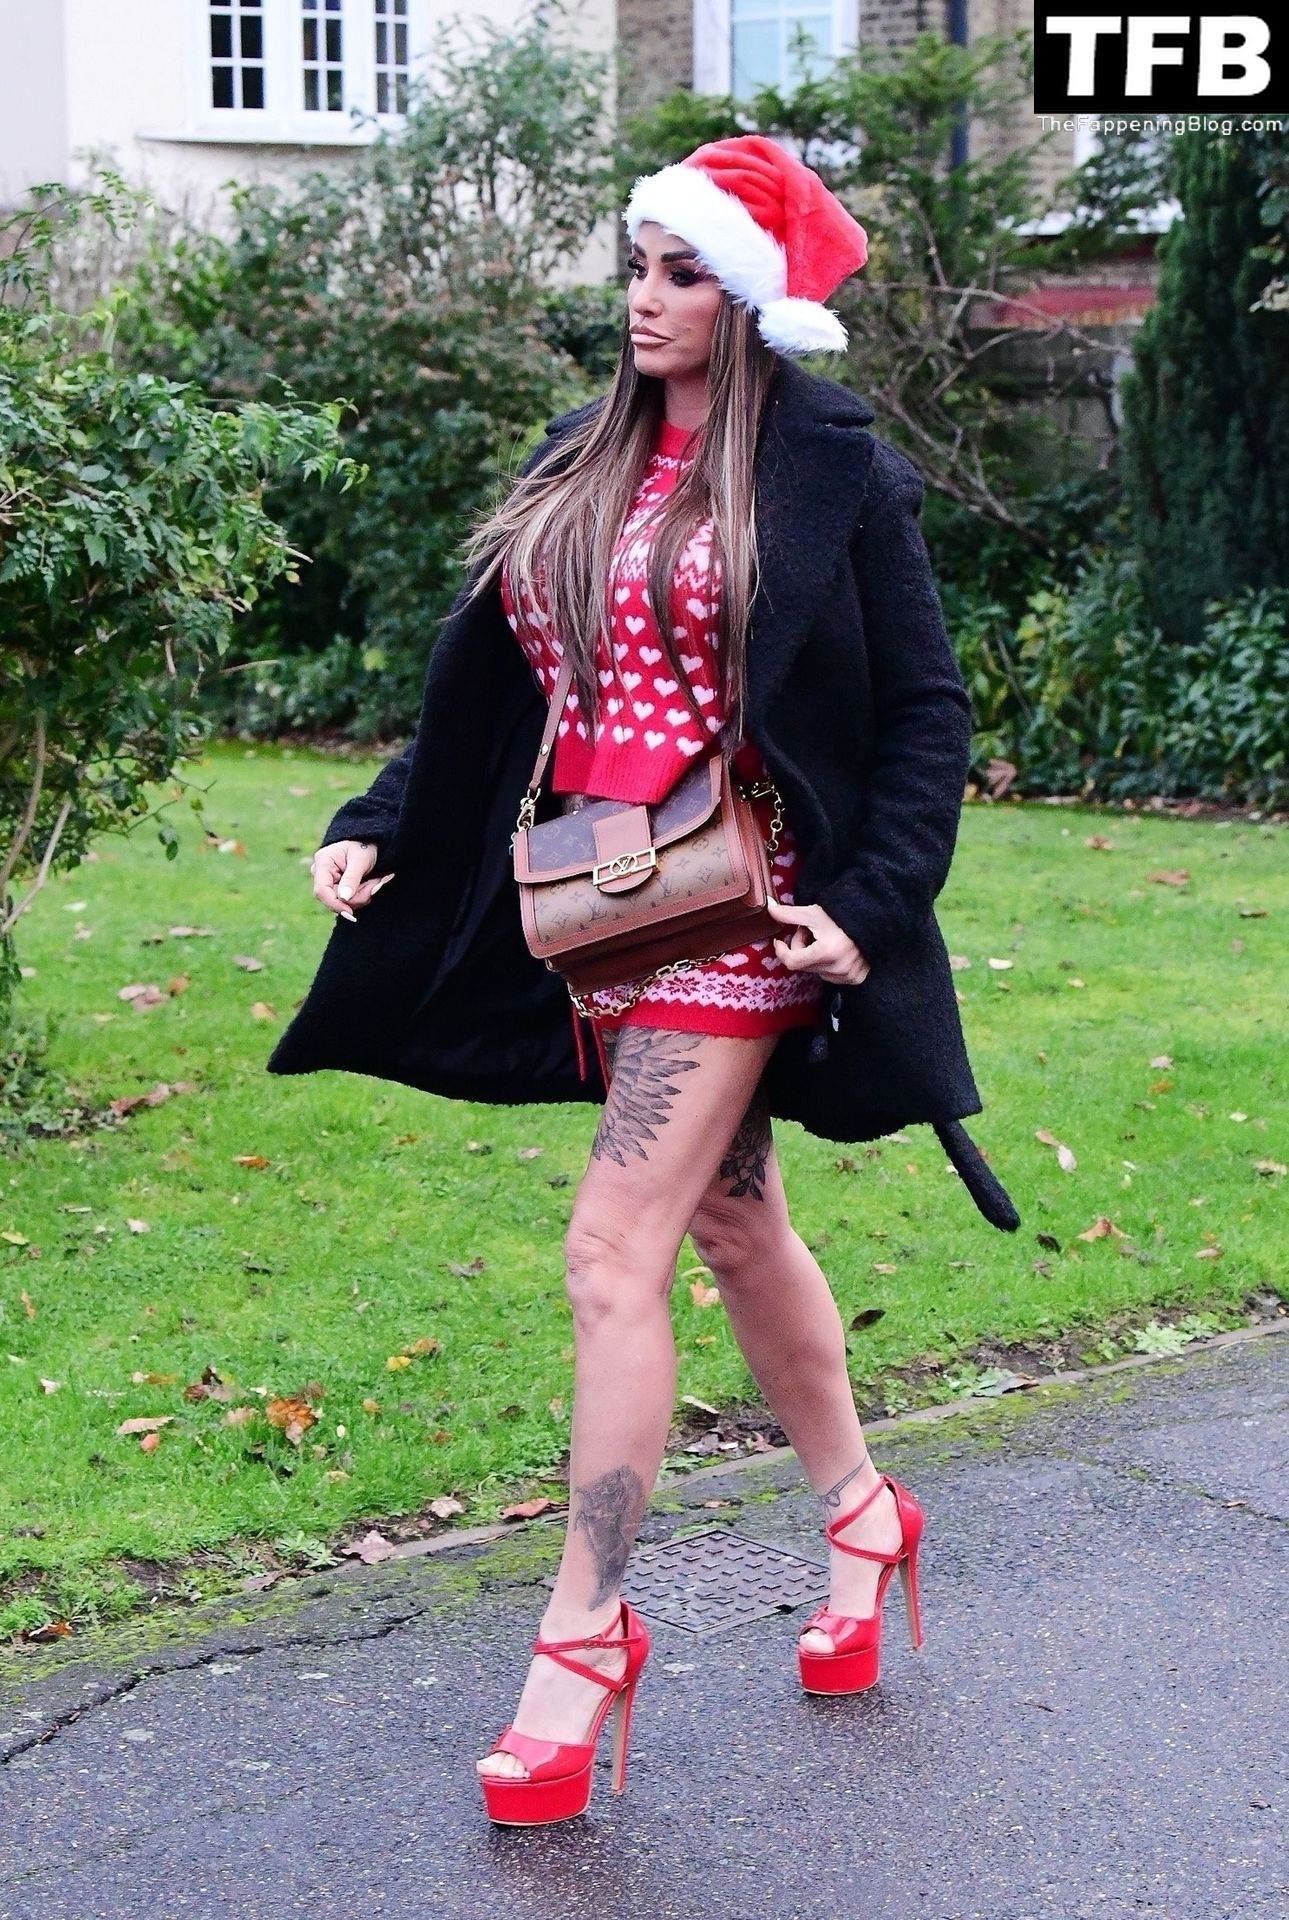 Katie Price Gets Into the Festive Spirit Dressed in Her Sexy Christmas Outfit (34 Photos)